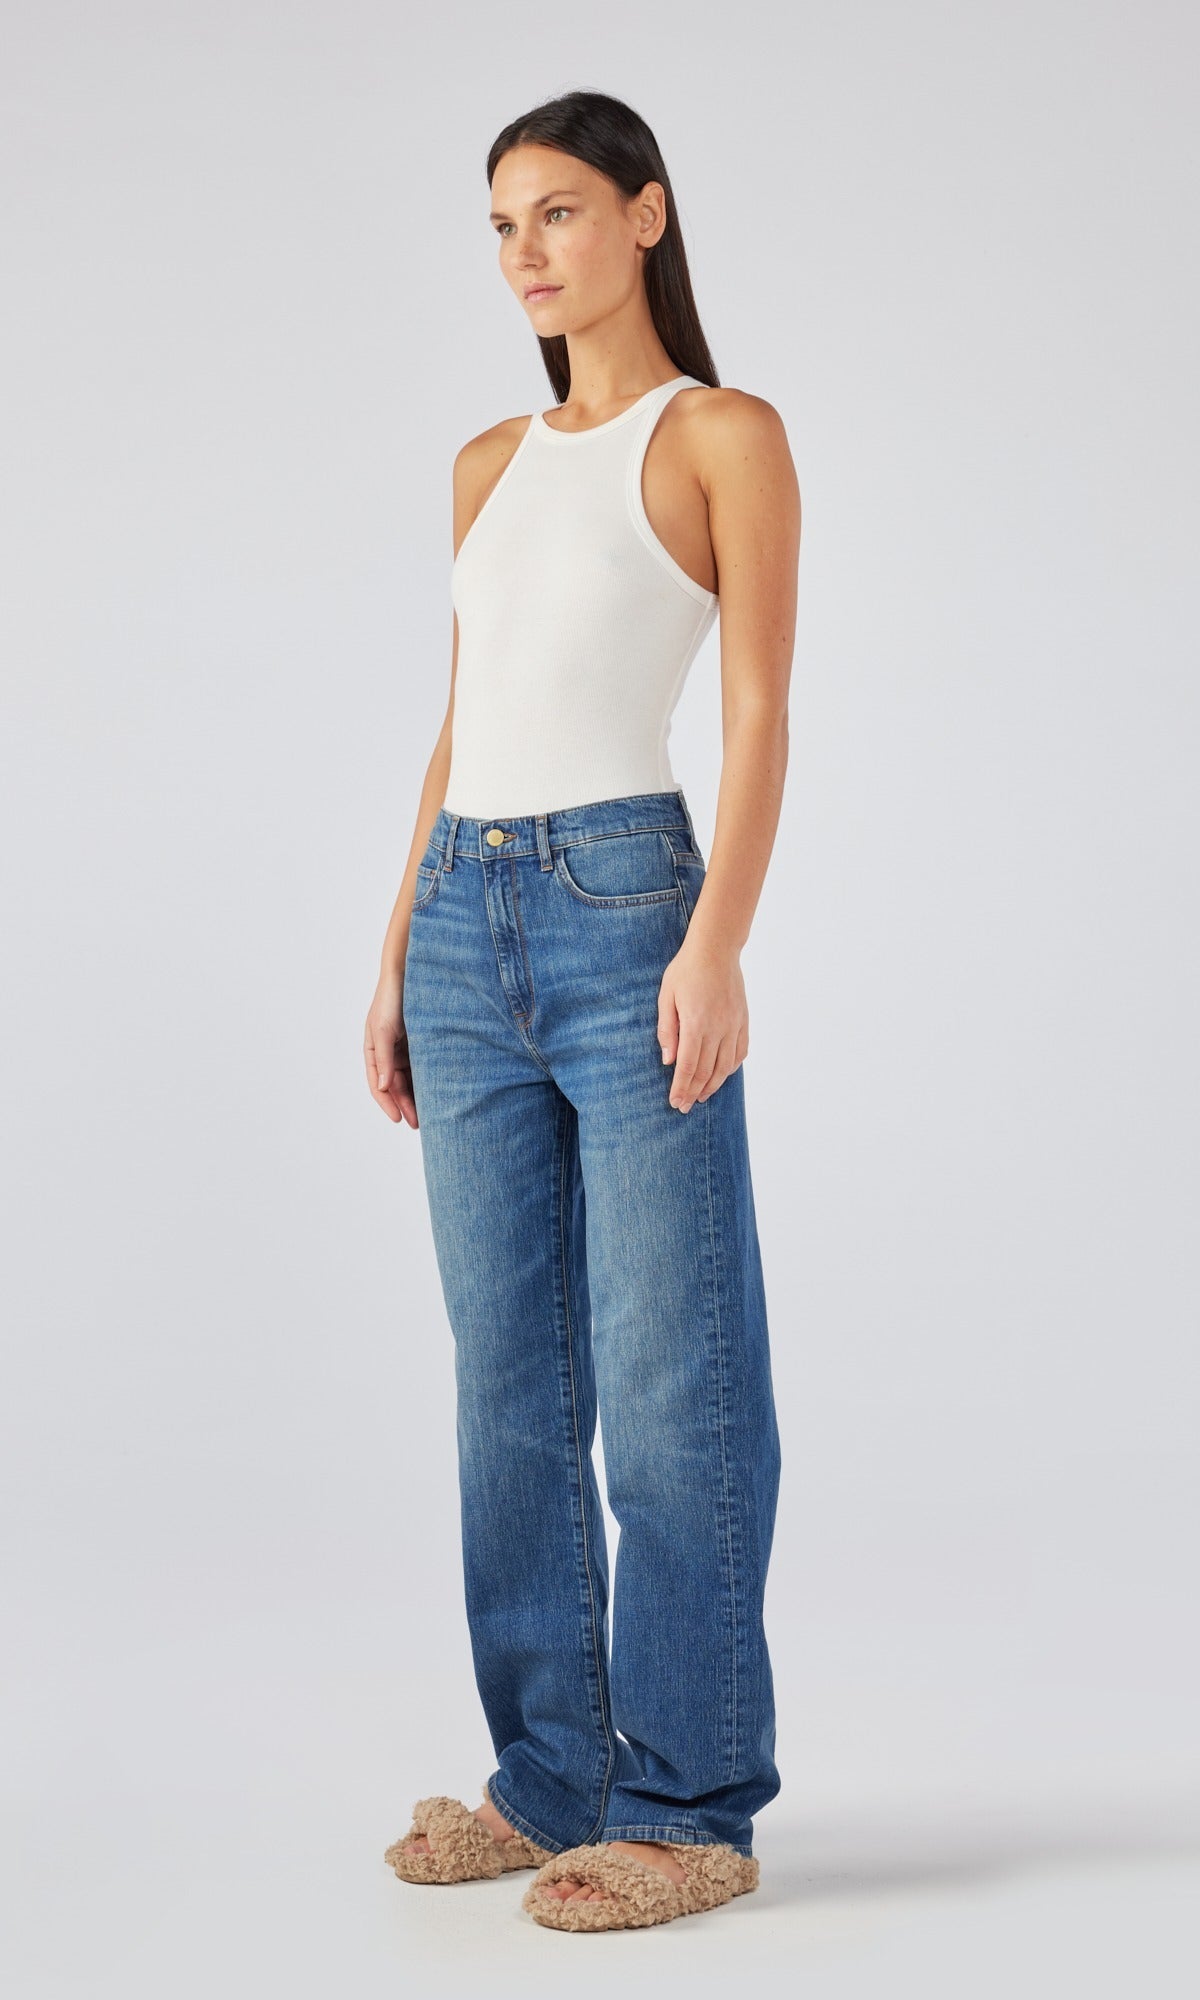 TRIARCHY High-Rise Wide-Leg Jeans